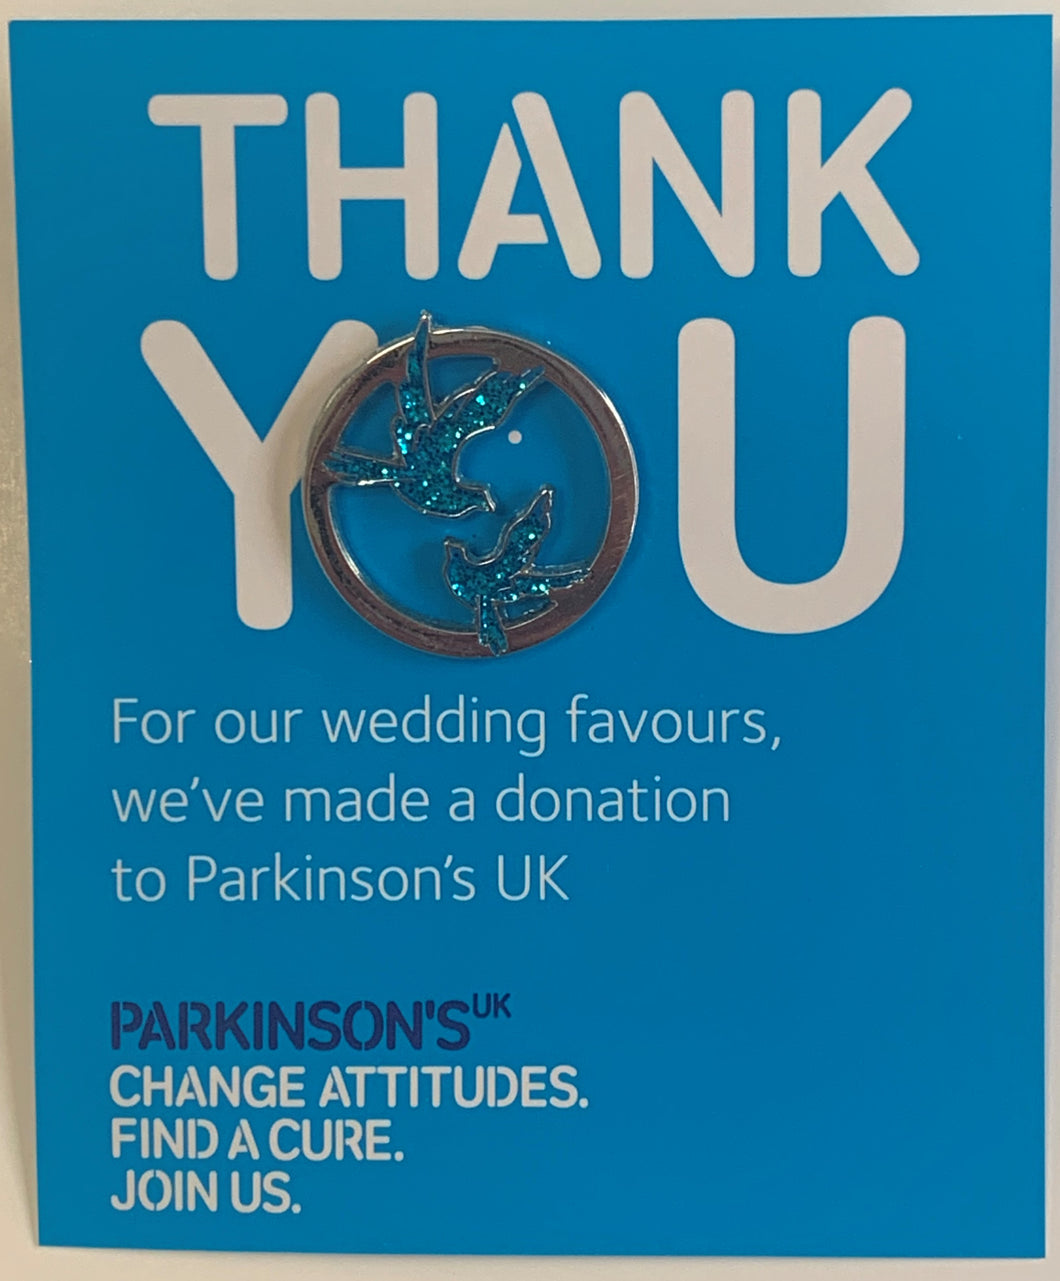 Parkinson's UK charity wedding favours - Love birds. Pack of 10.